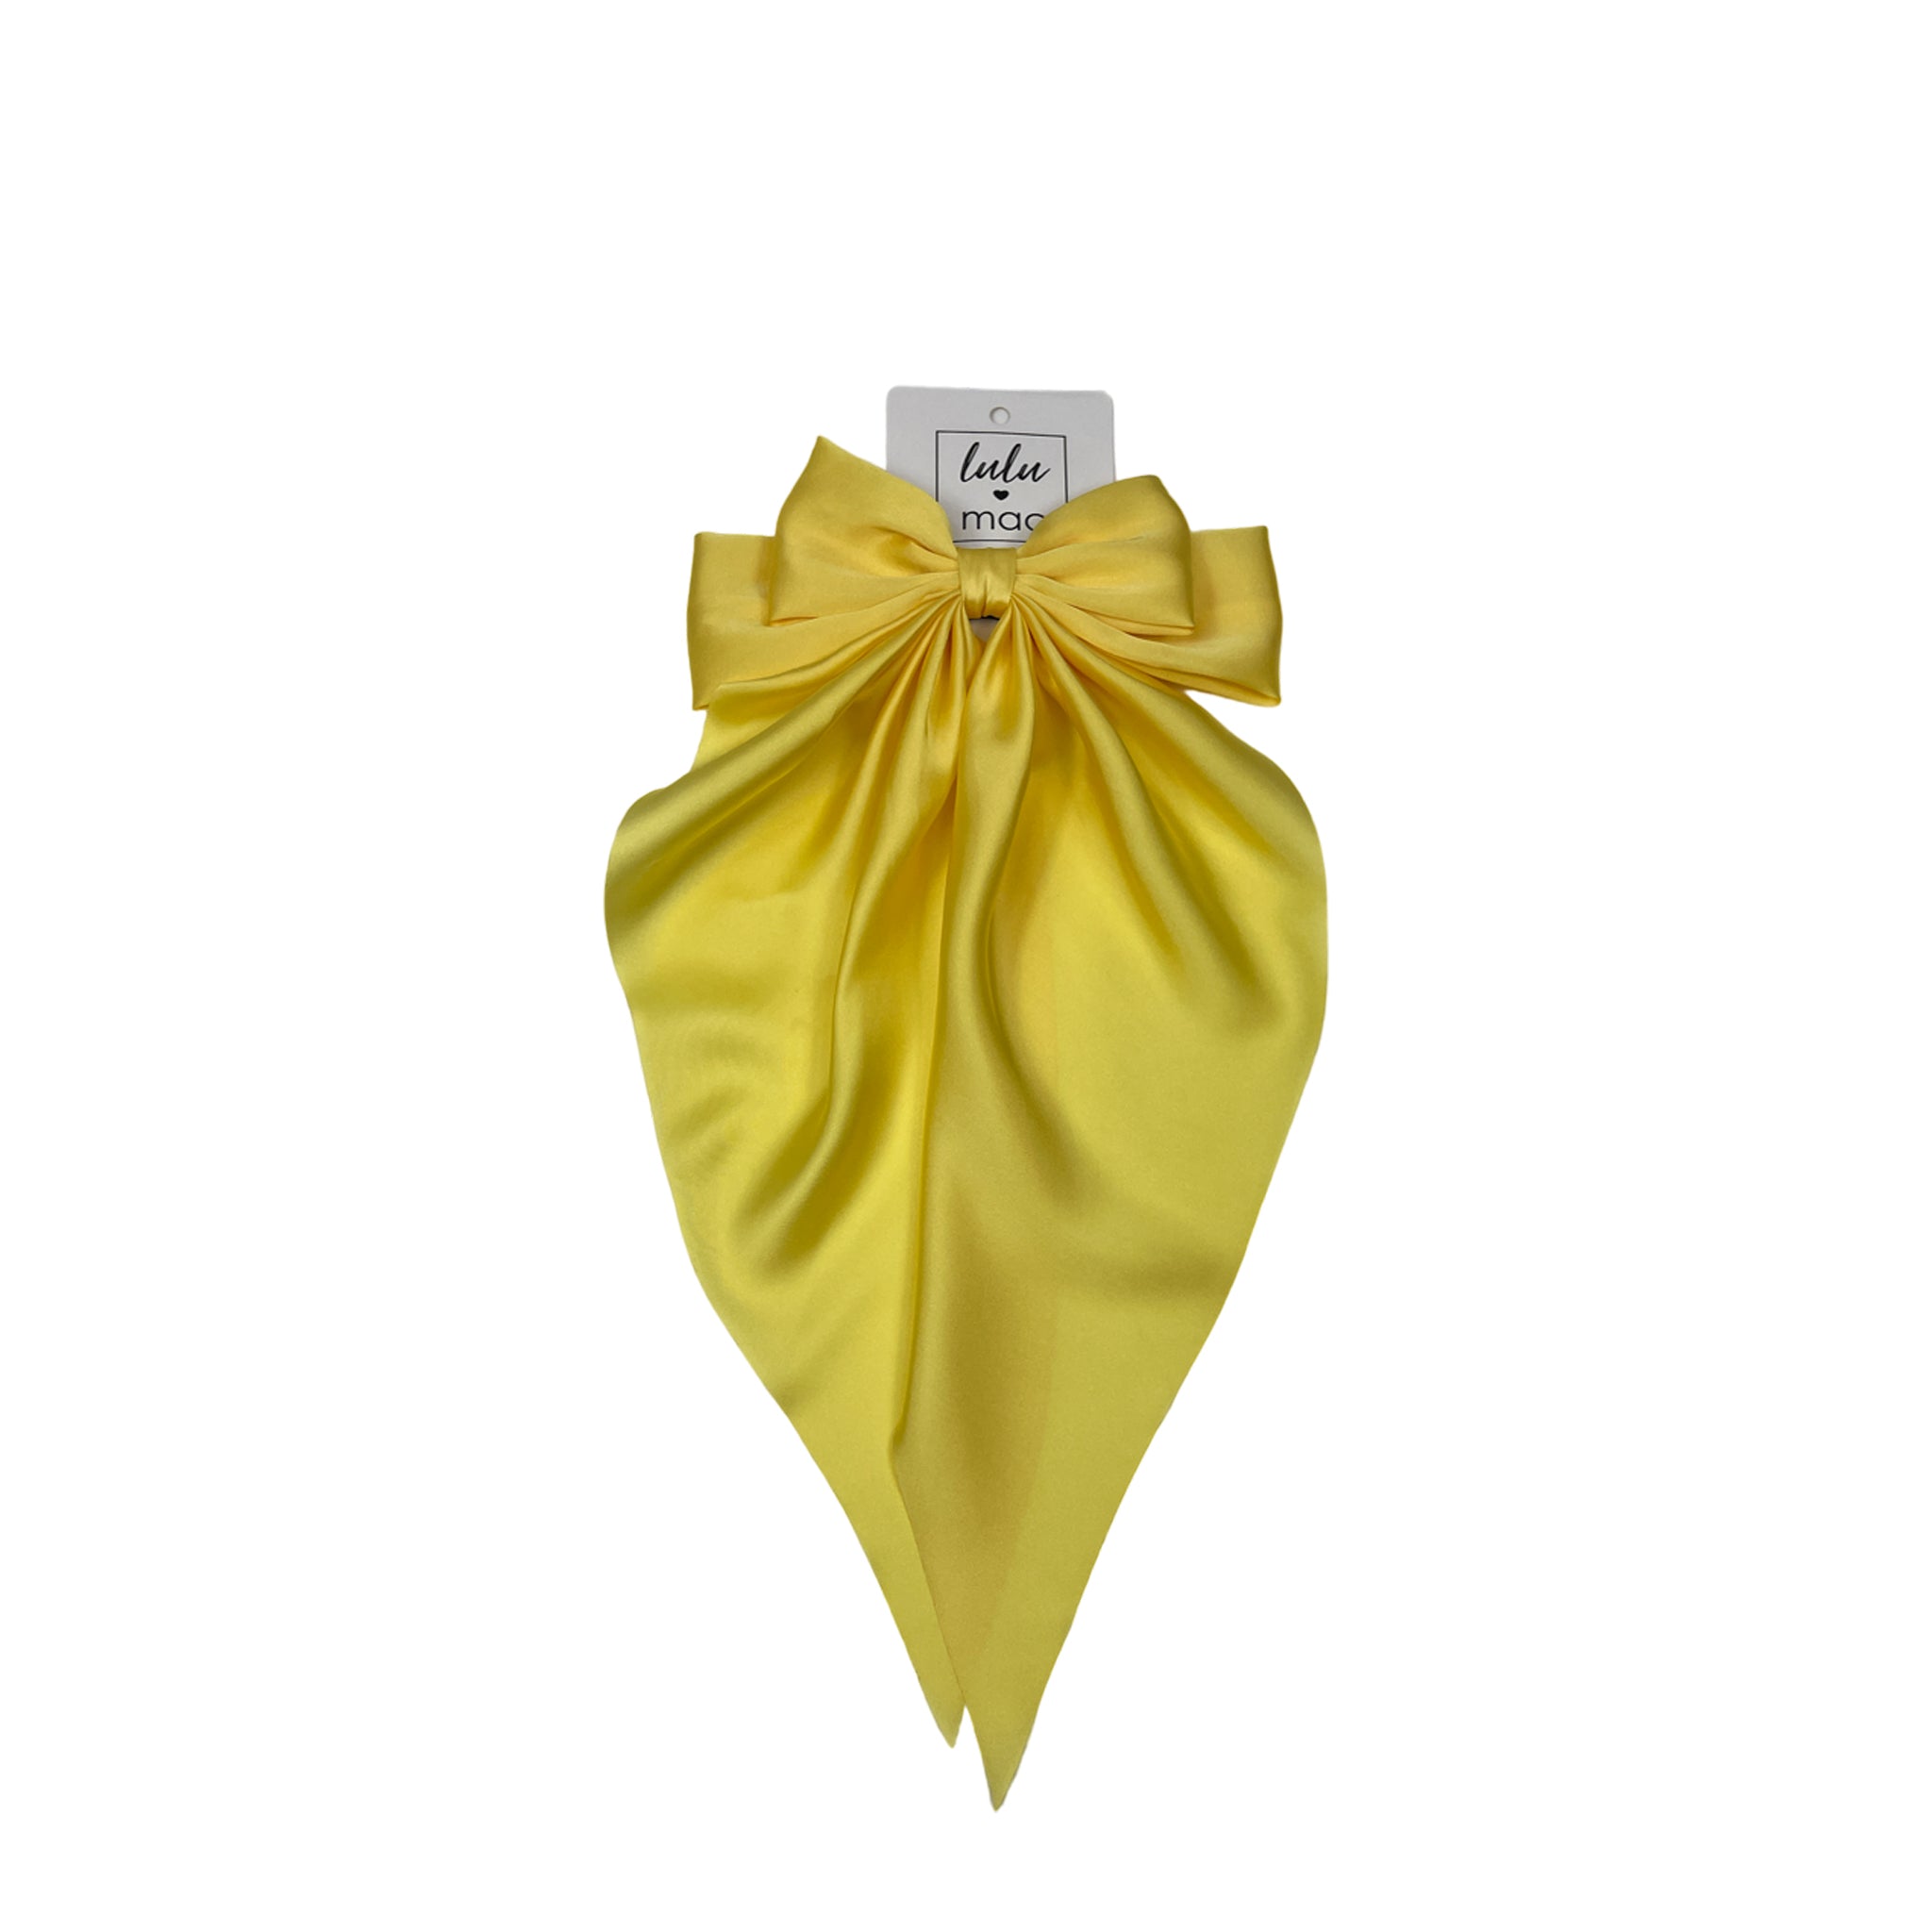 DDL-2270 Large Satin Bow Yellow